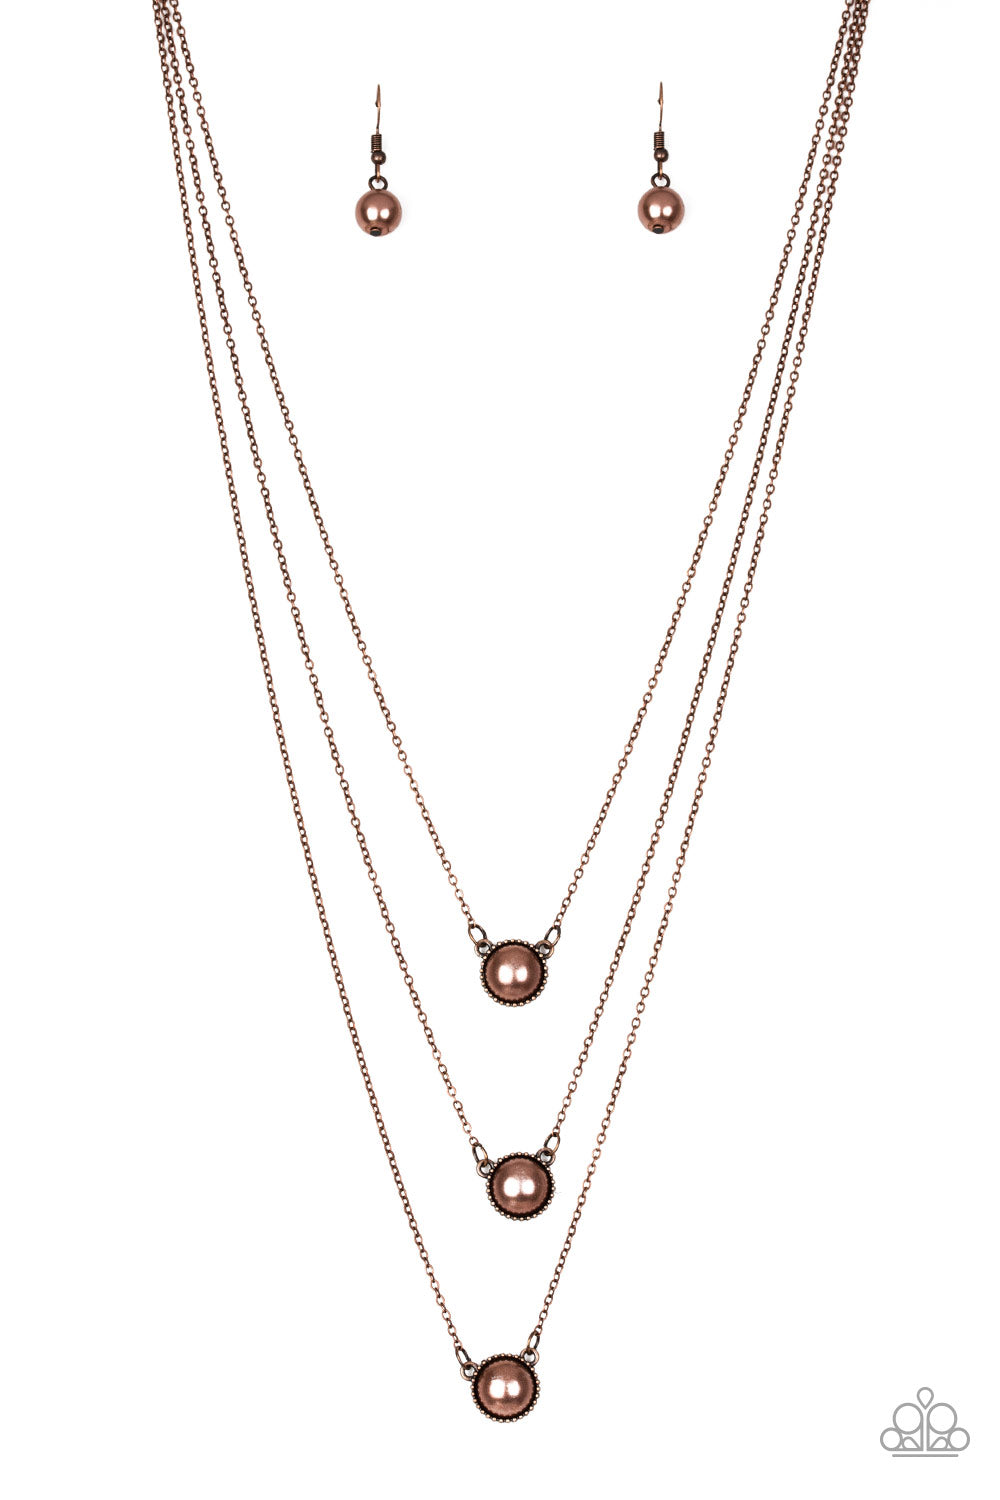 A Love for Luster - copper - Paparazzi necklace